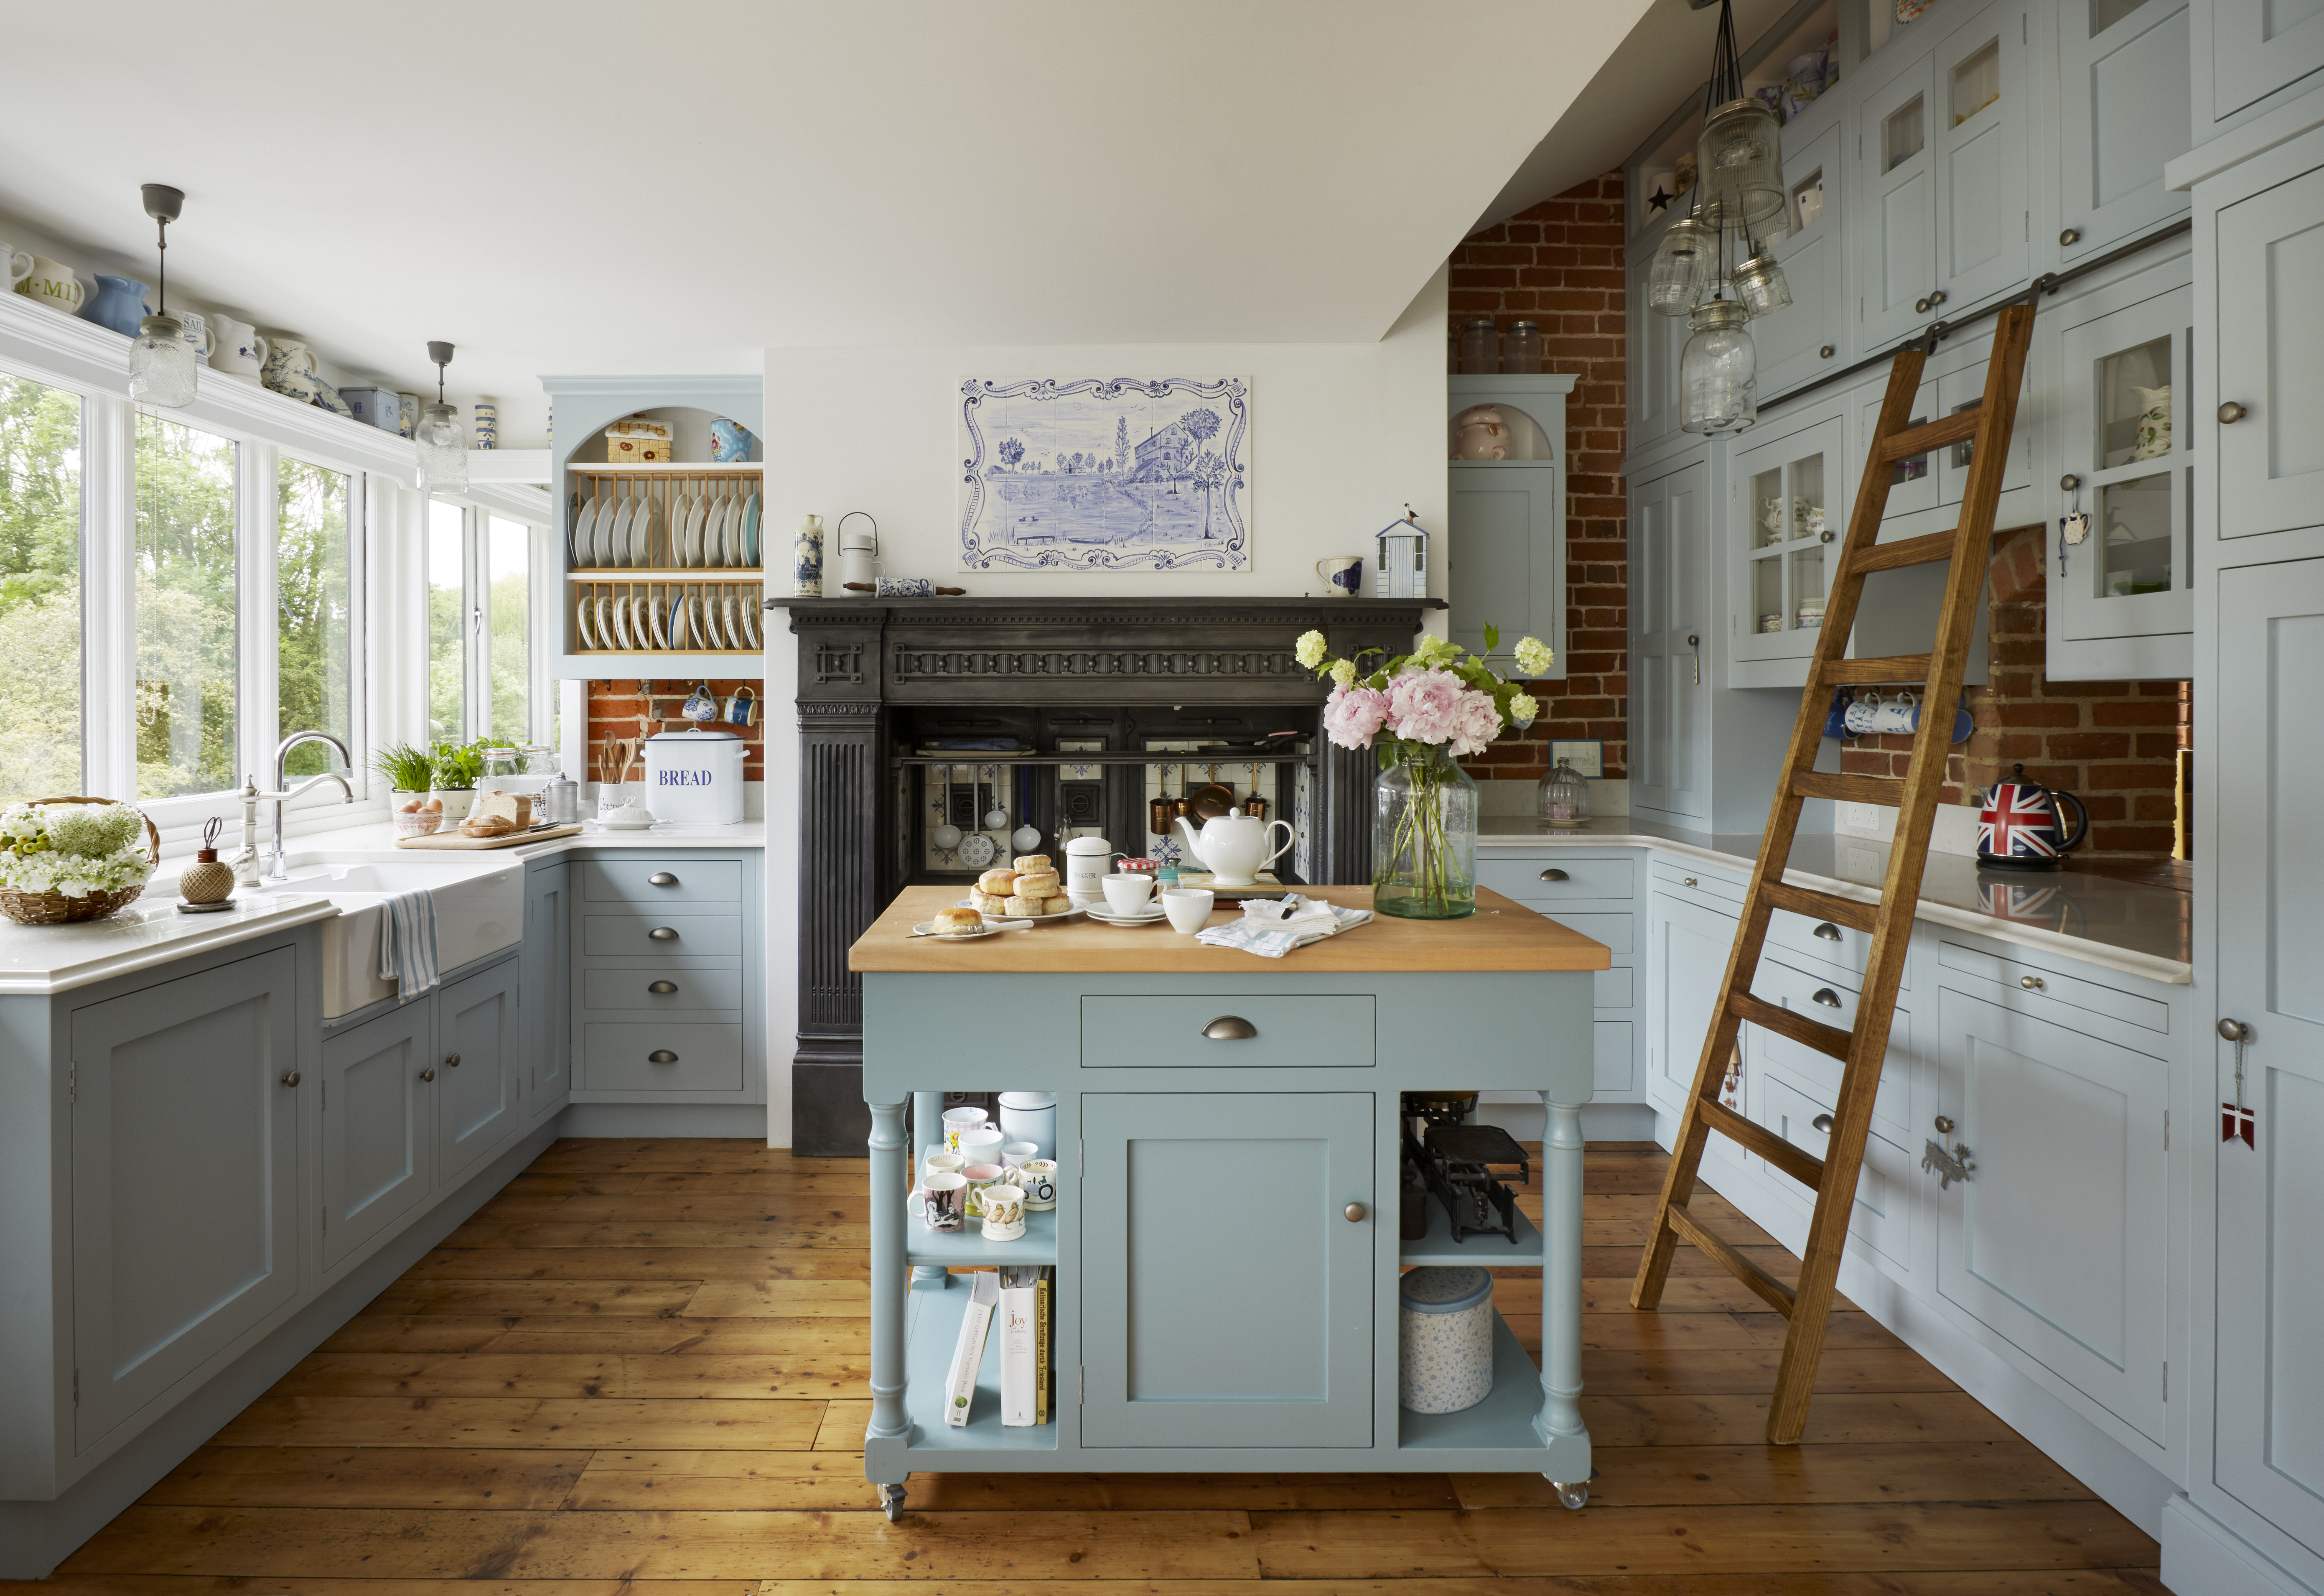 Designing a farmhouse kitchen: 13 ideas that are brimming with character |  Real Homes